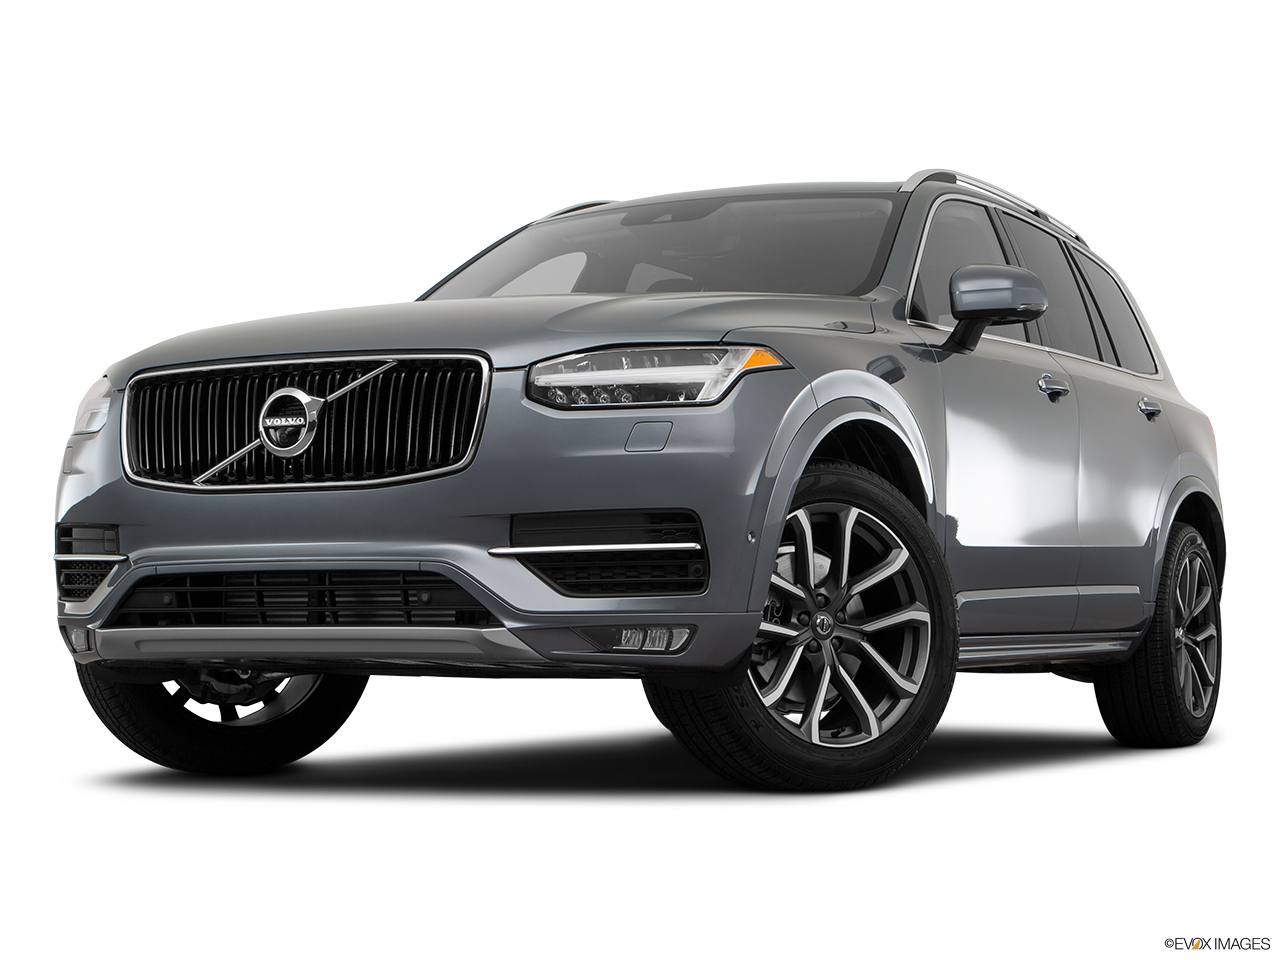 2017 Volvo XC90 T6 Momentum Front angle view, low wide perspective. 